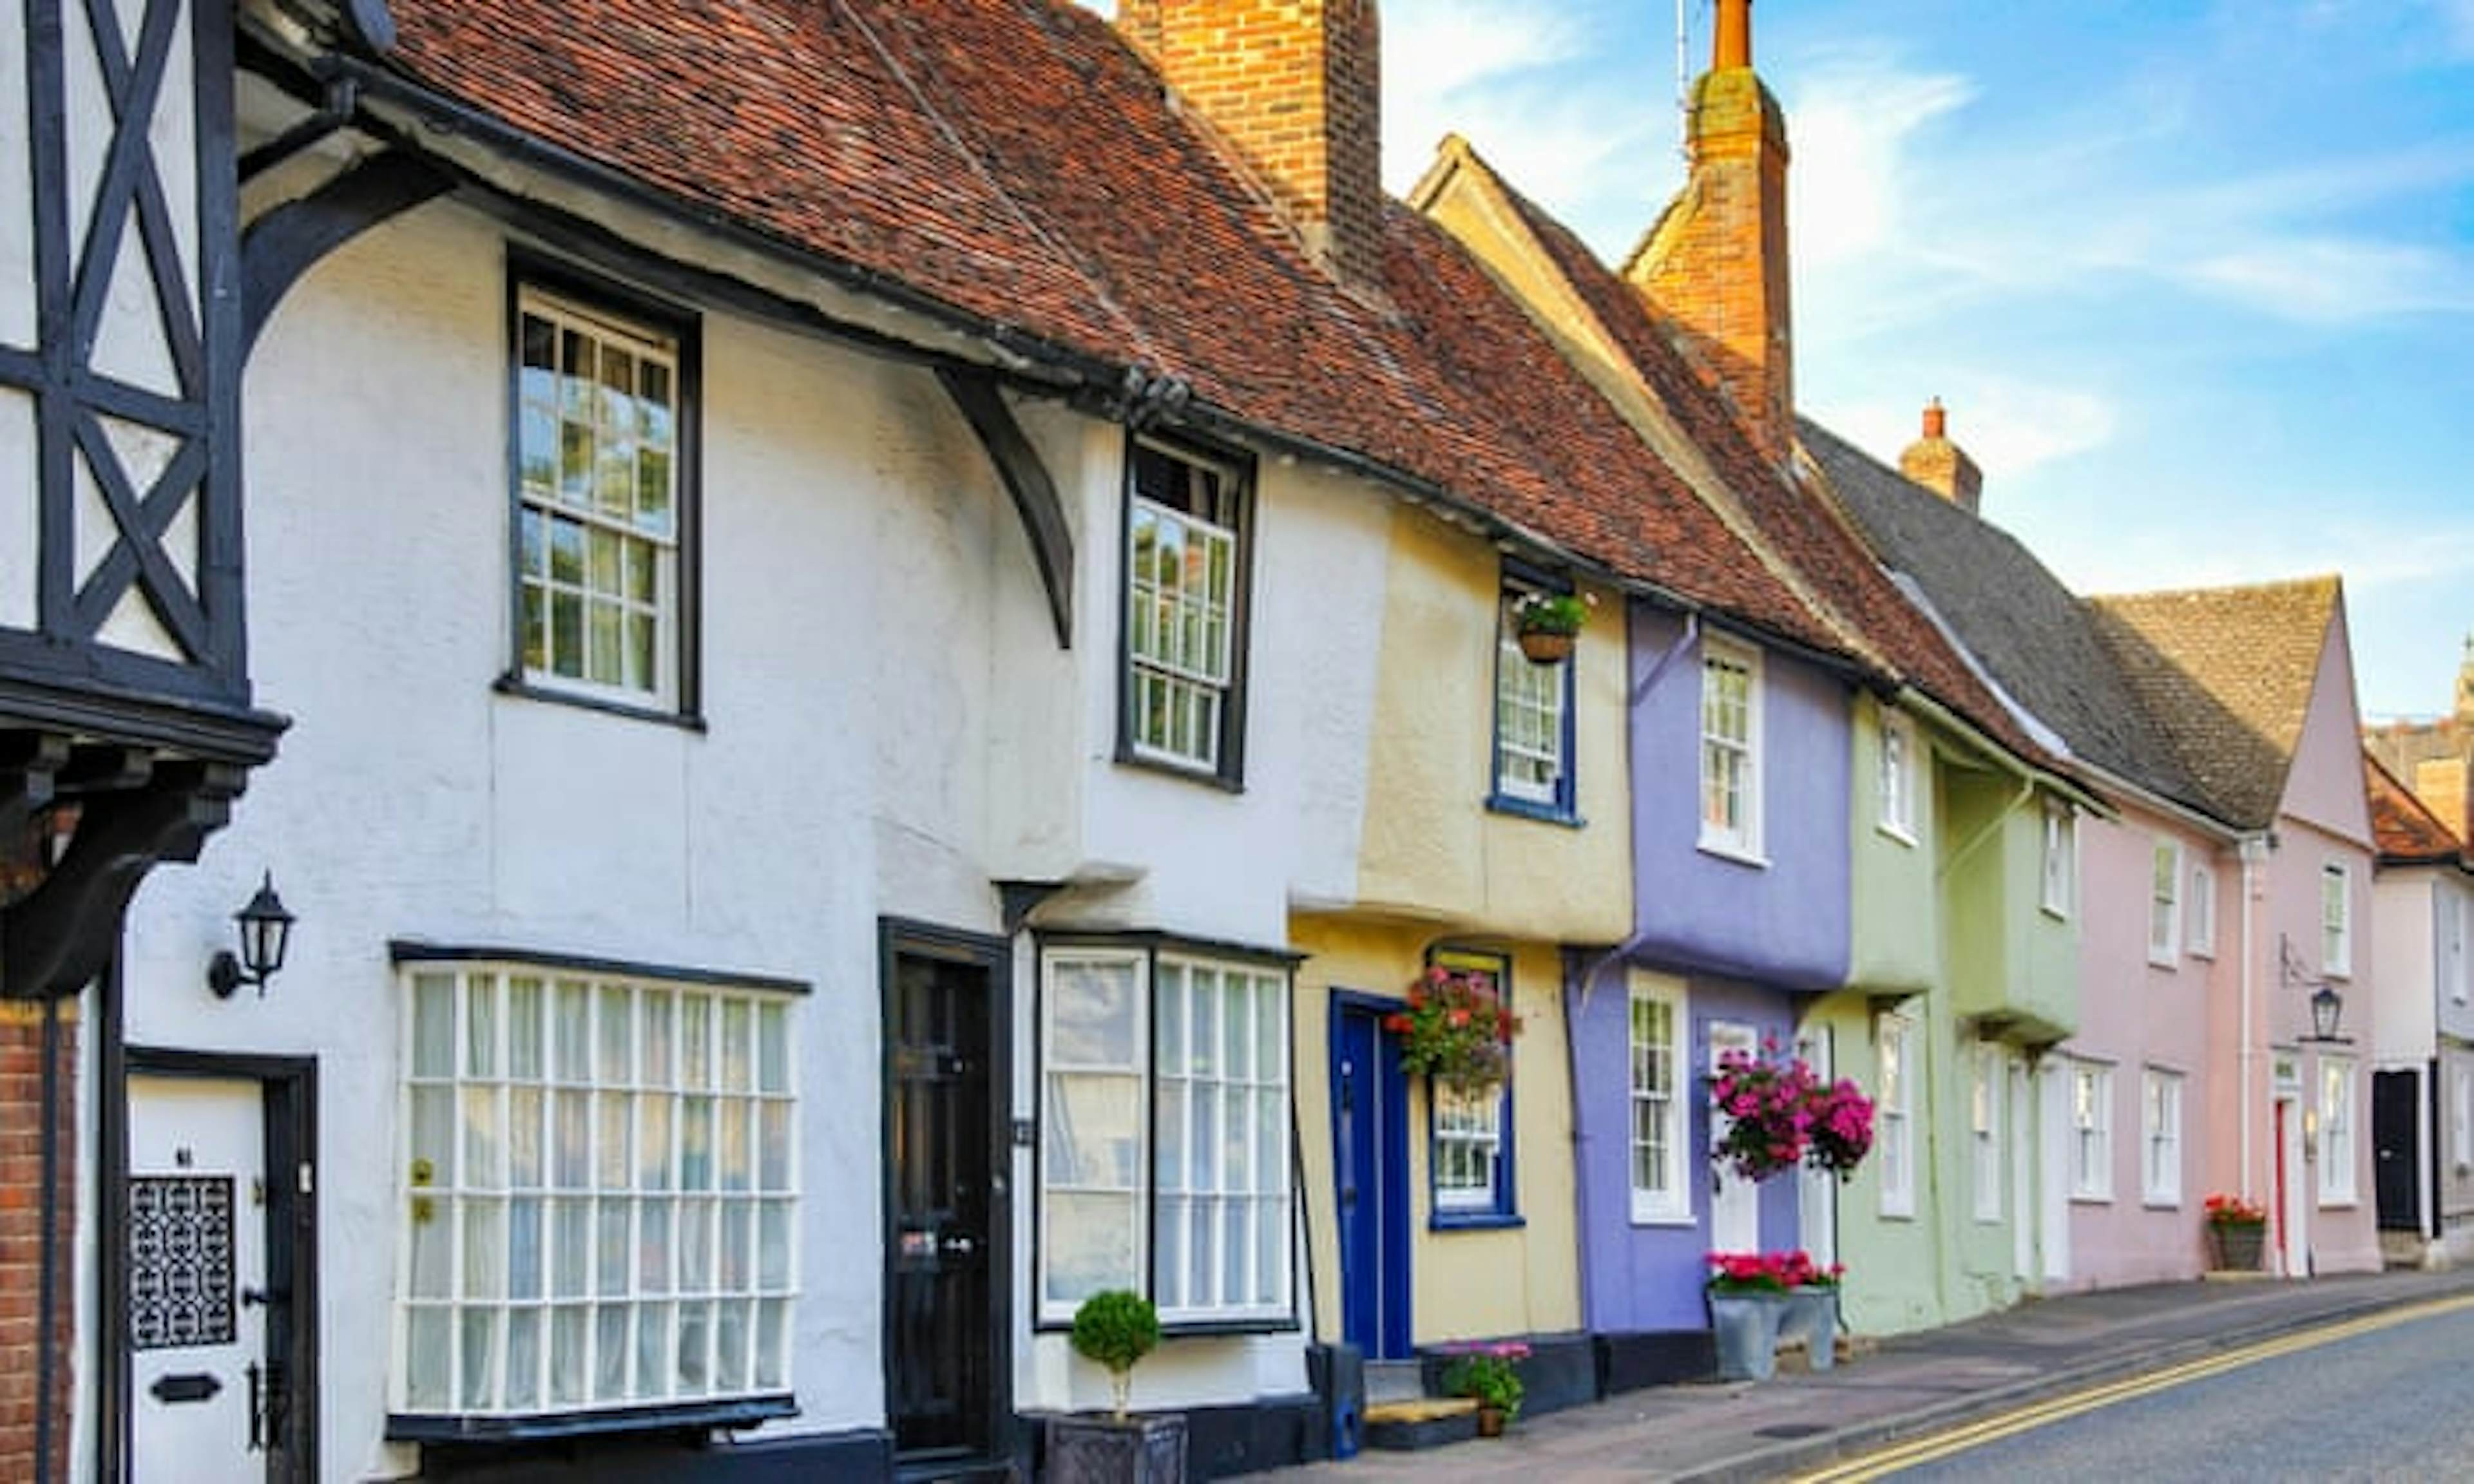 15 UK market towns you'll want to ...